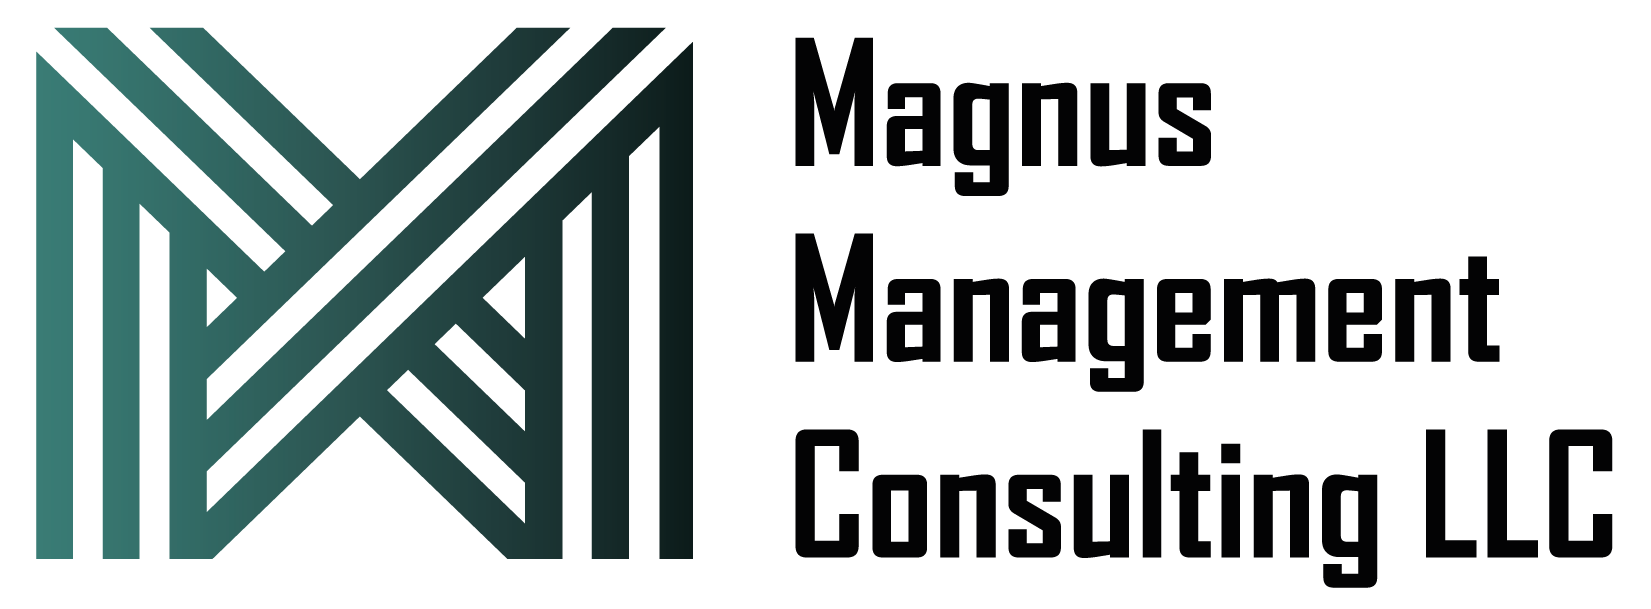 Magnus Management Quality, Strategy and Excellence Consultantالتميز المؤسسي